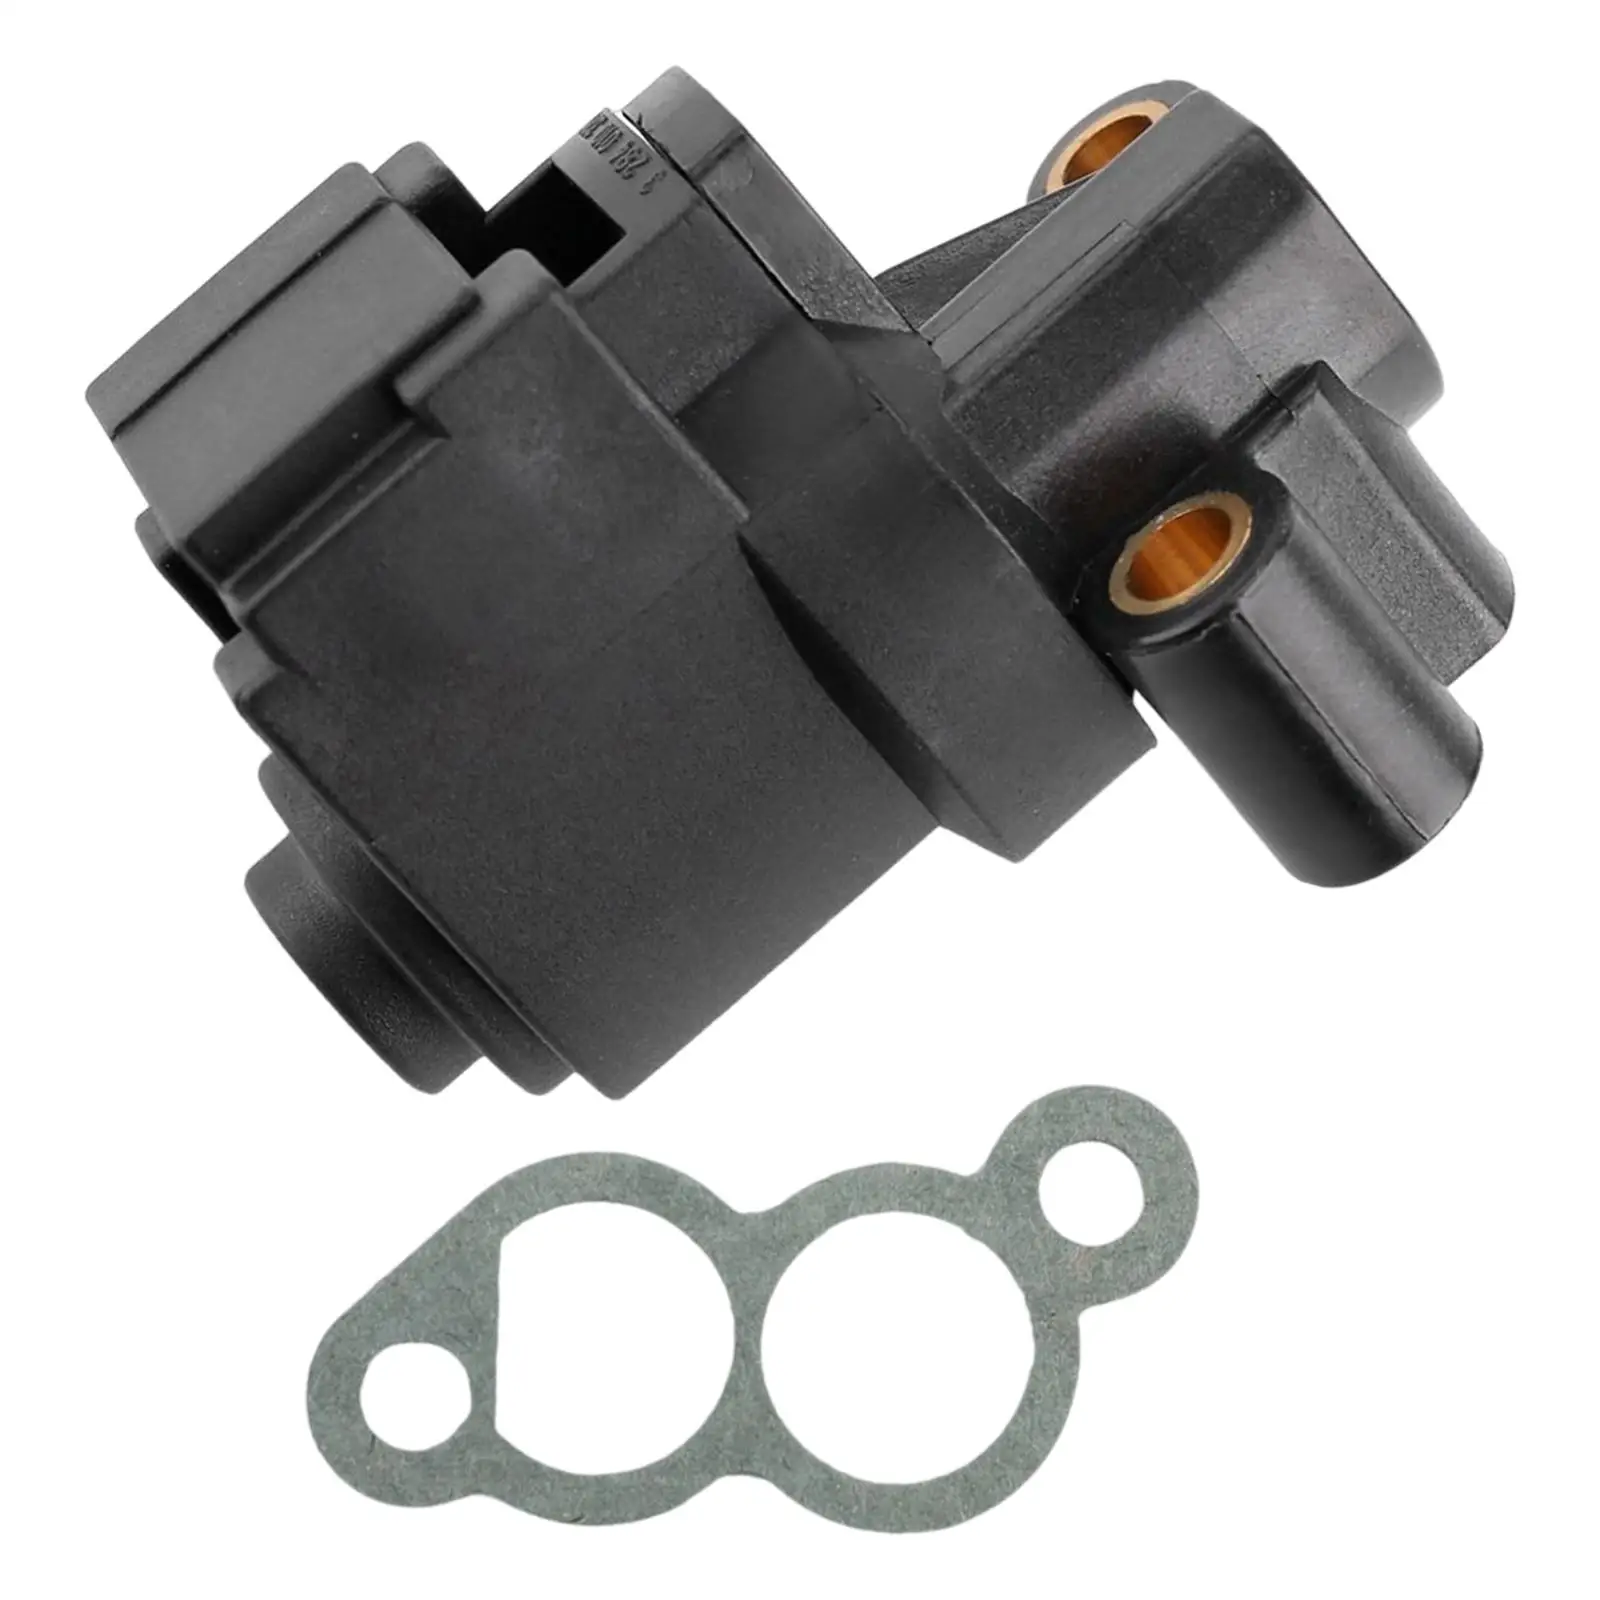 Iac Idle  Valve, 3512600 3515002600 Fits for    for   Components Replacement Control Valve